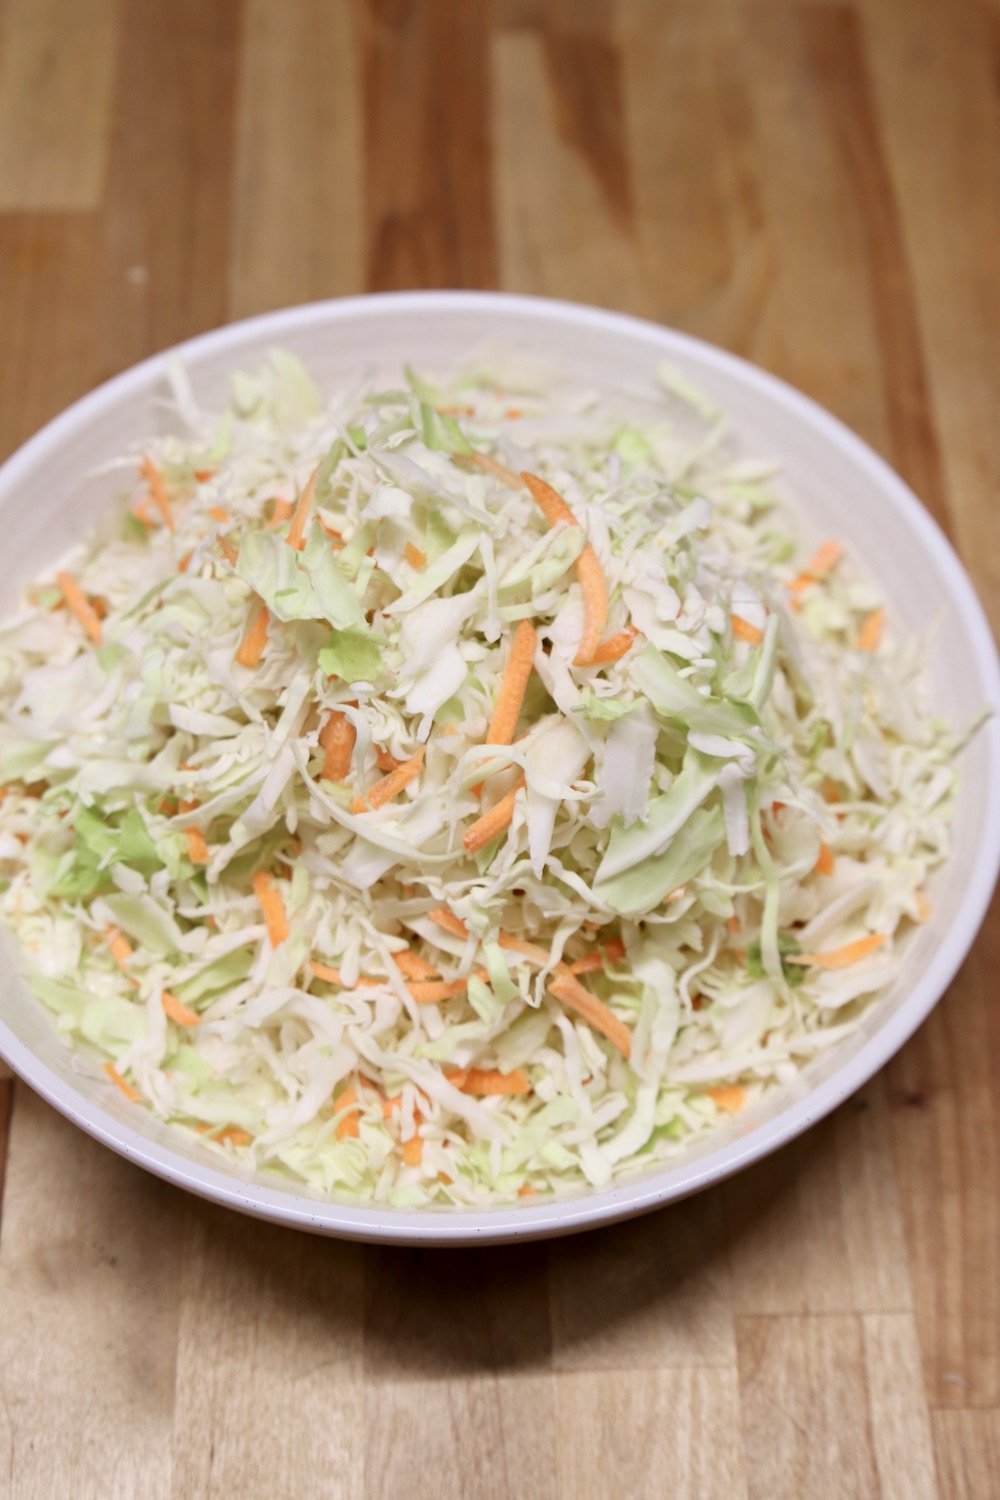 shredded cabbage and carrots in a bowl for coleslaw